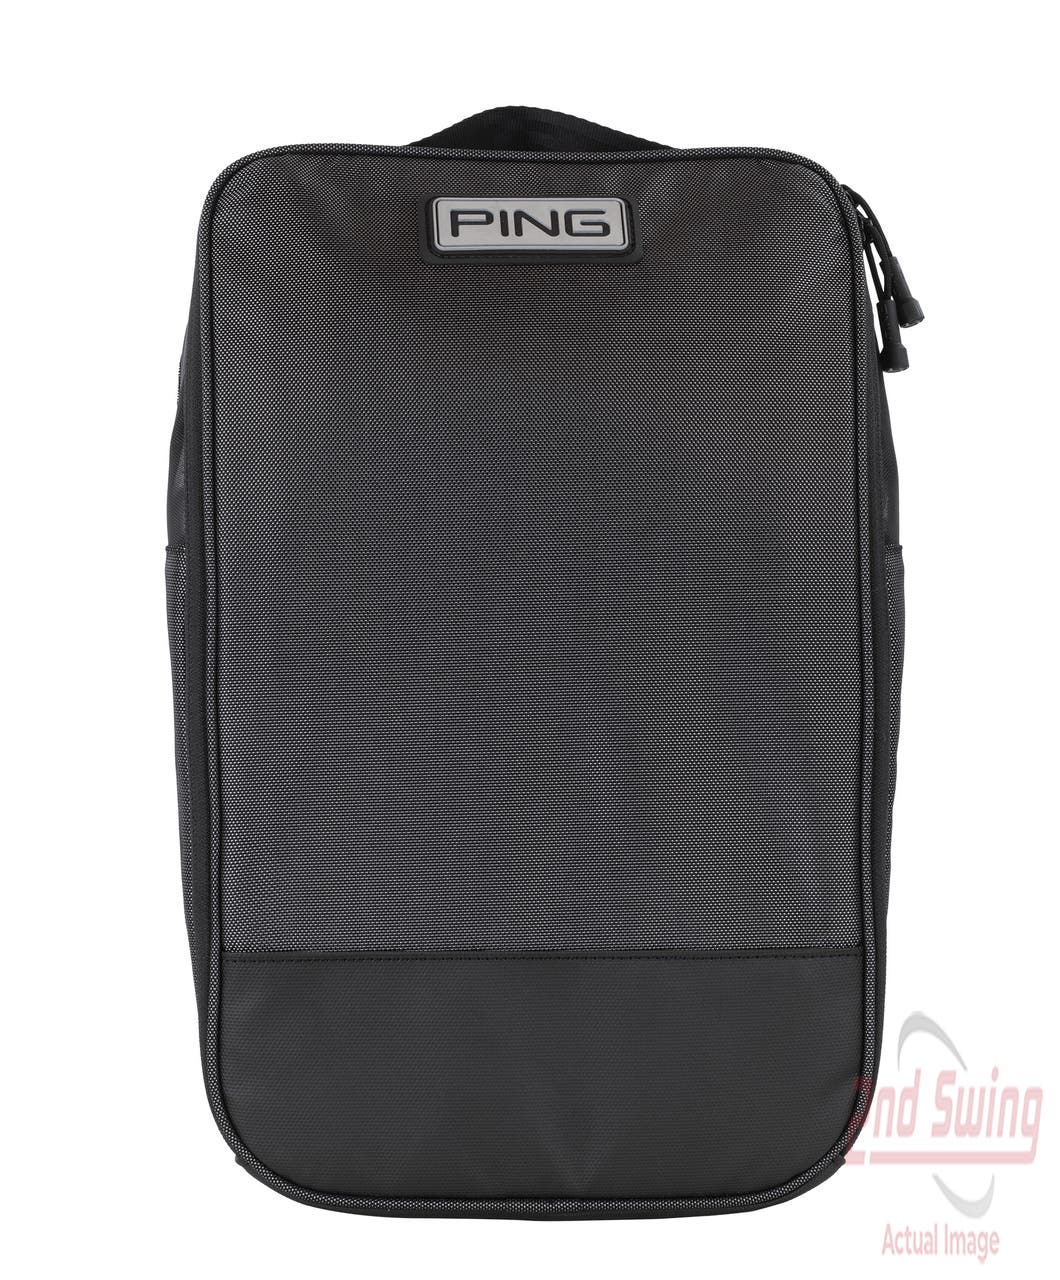 Ping 2022 Shoe Bag Accessories